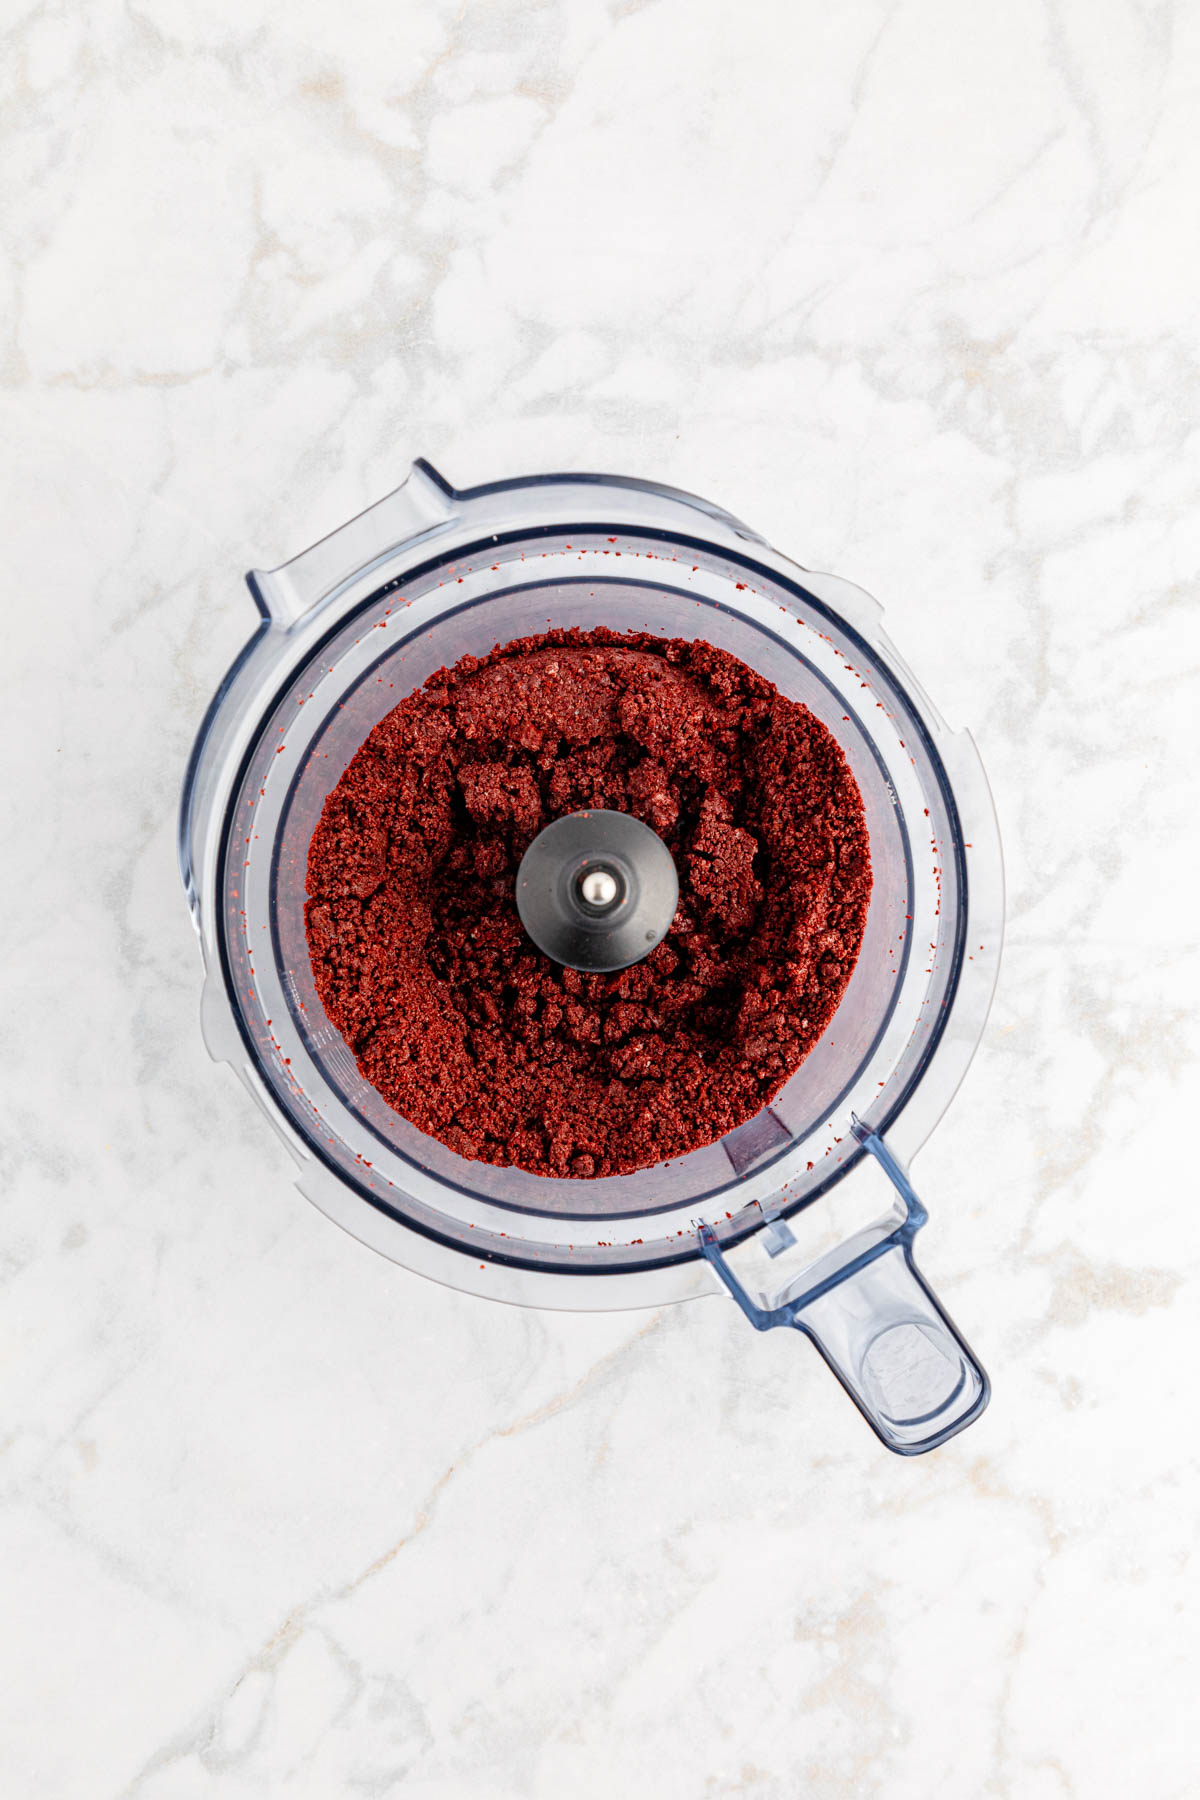 Red velvet oreo cookie crumbs in food processor on a marble surface.